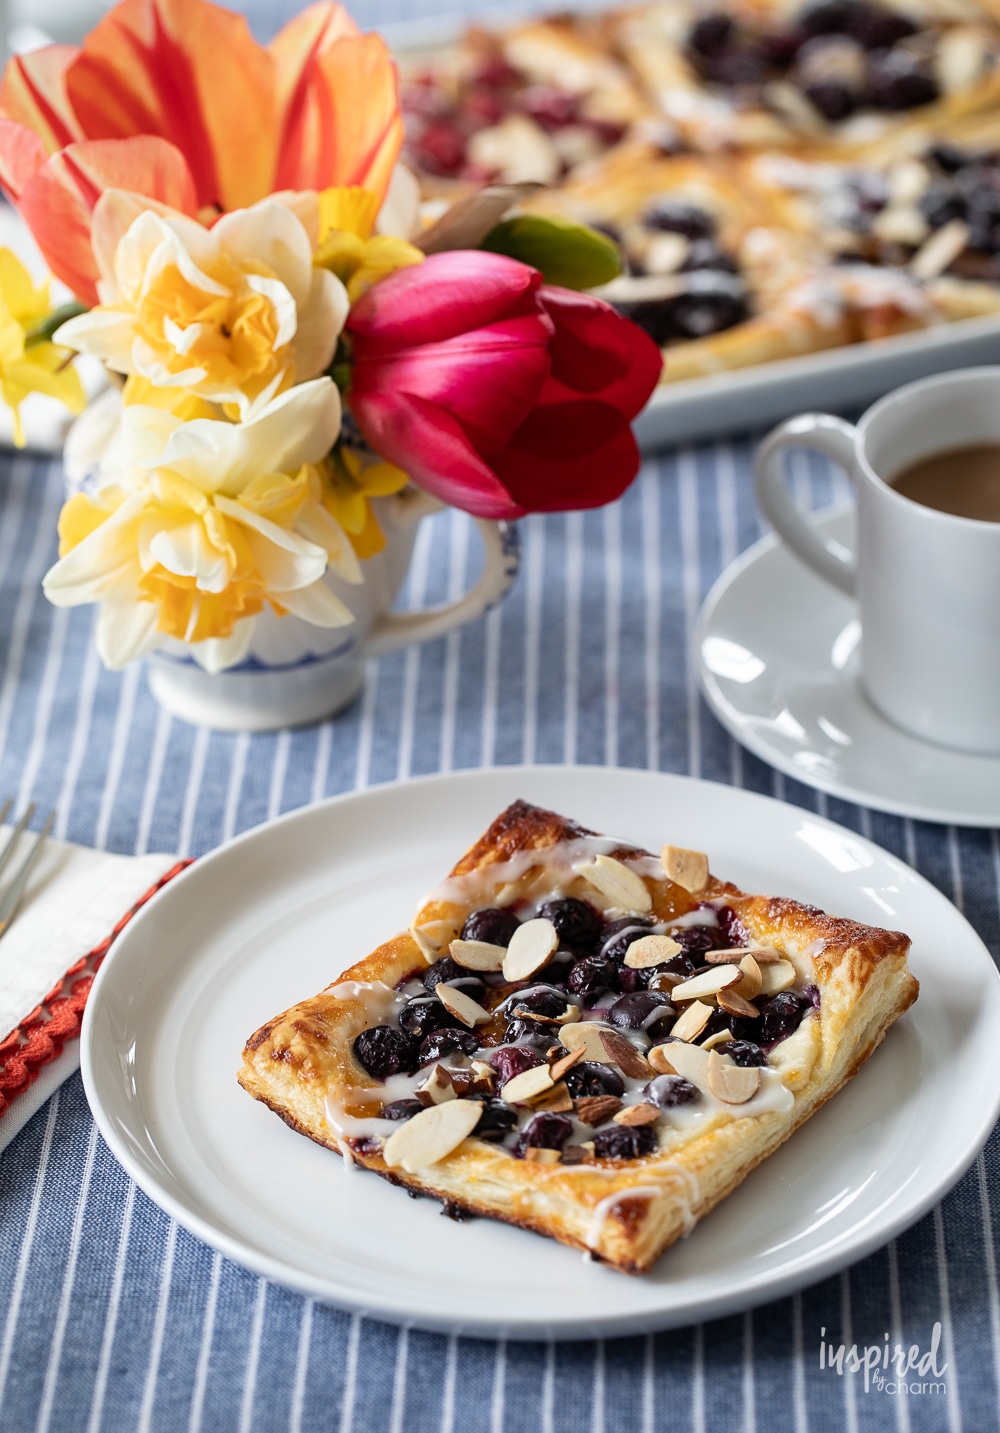 single blueberry and cream cheese danish on a plate with a vase of flowers.